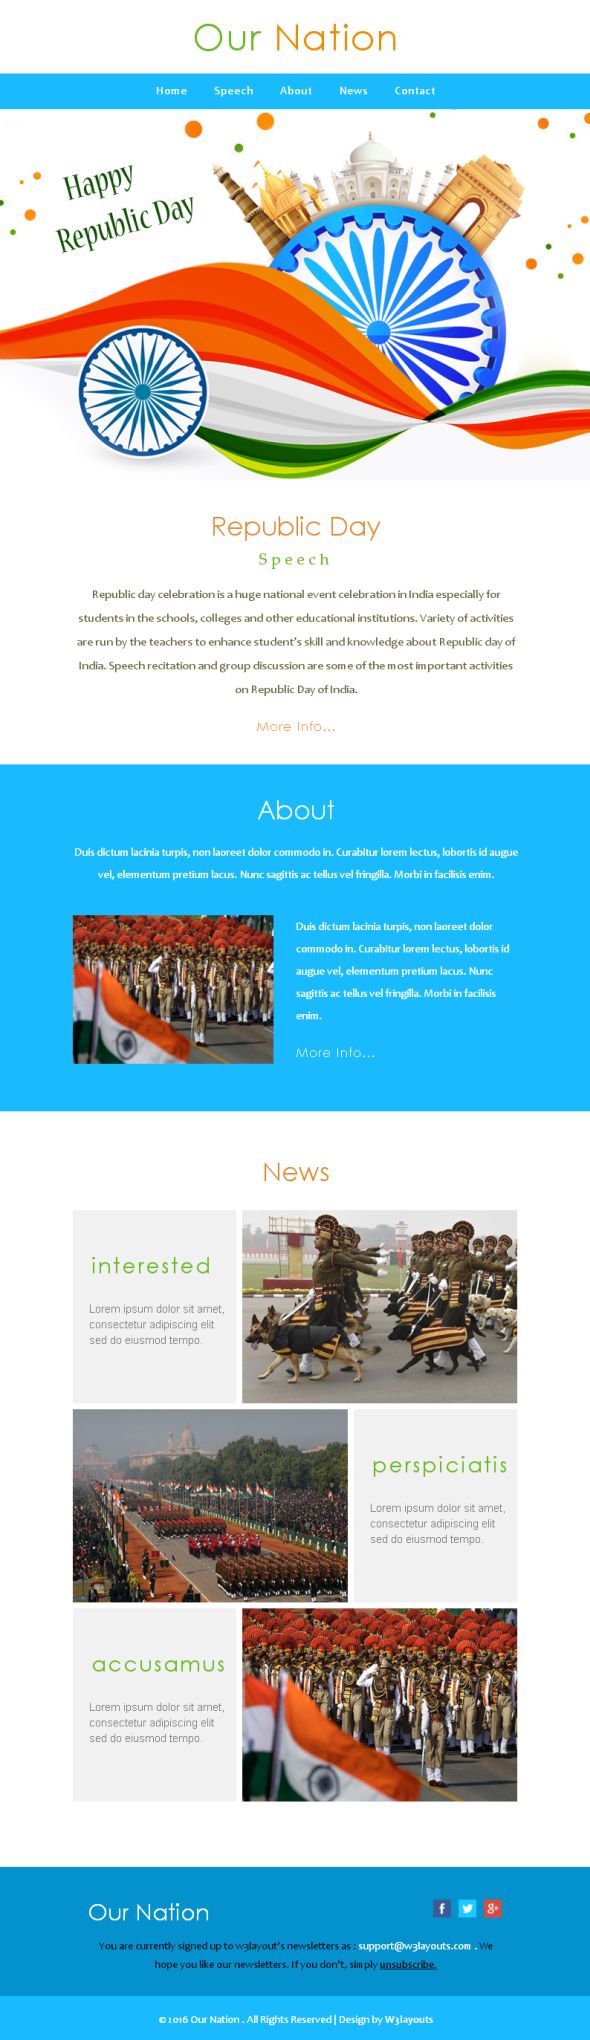 ournation-newsletter-template